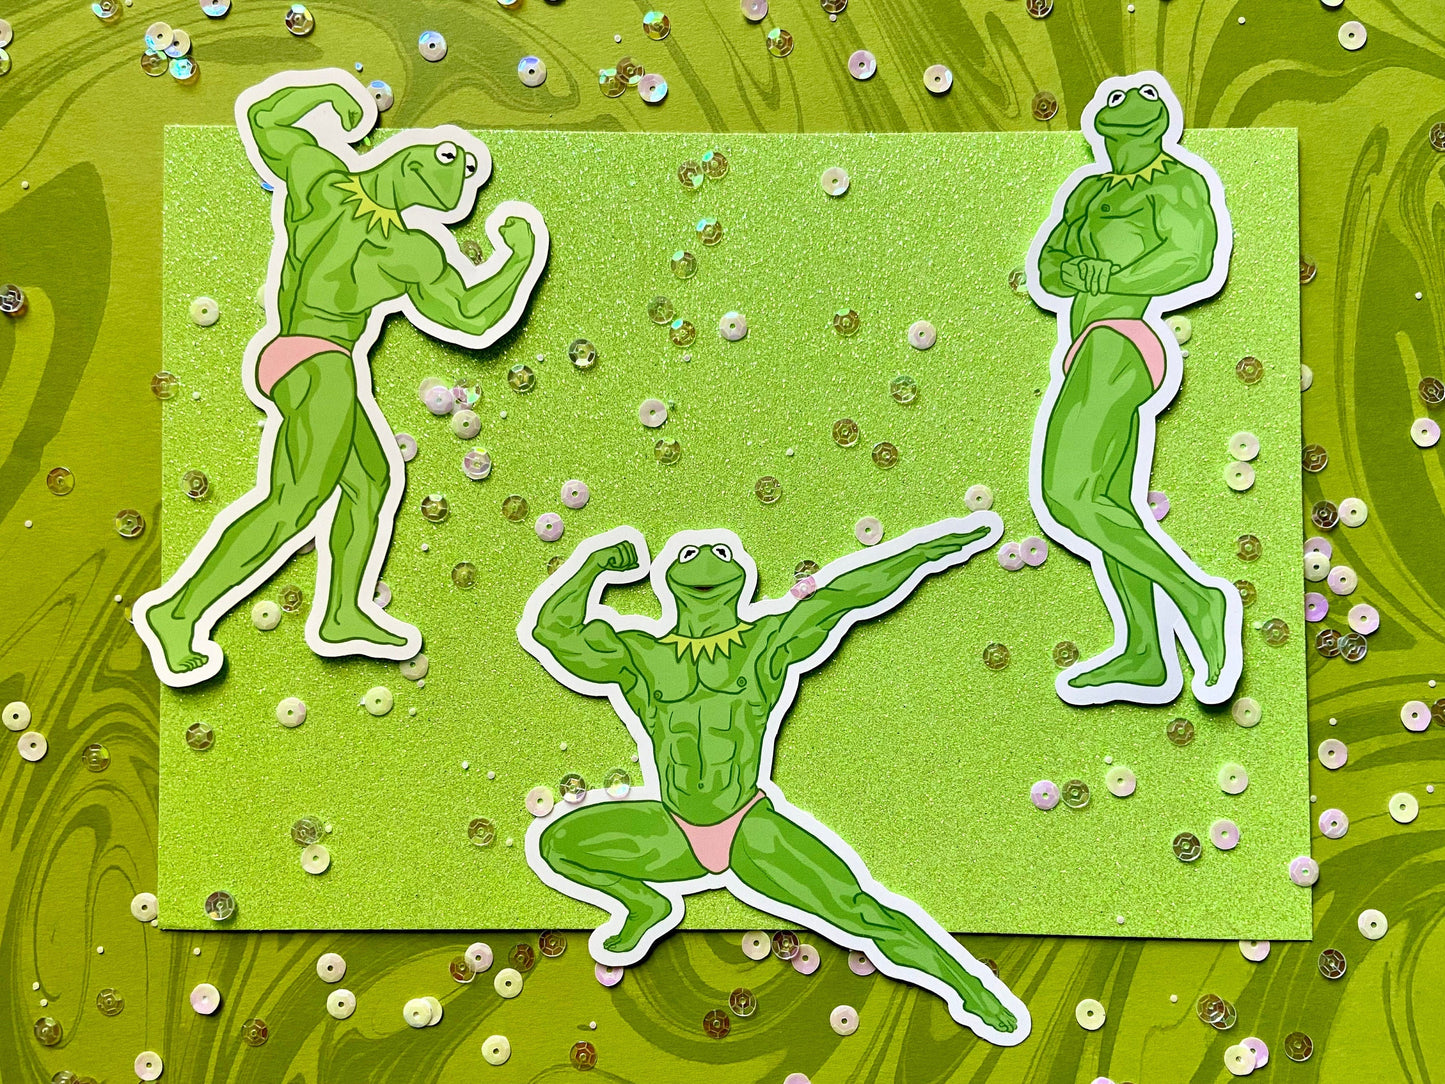 Buff Kermit the Frog Stickers